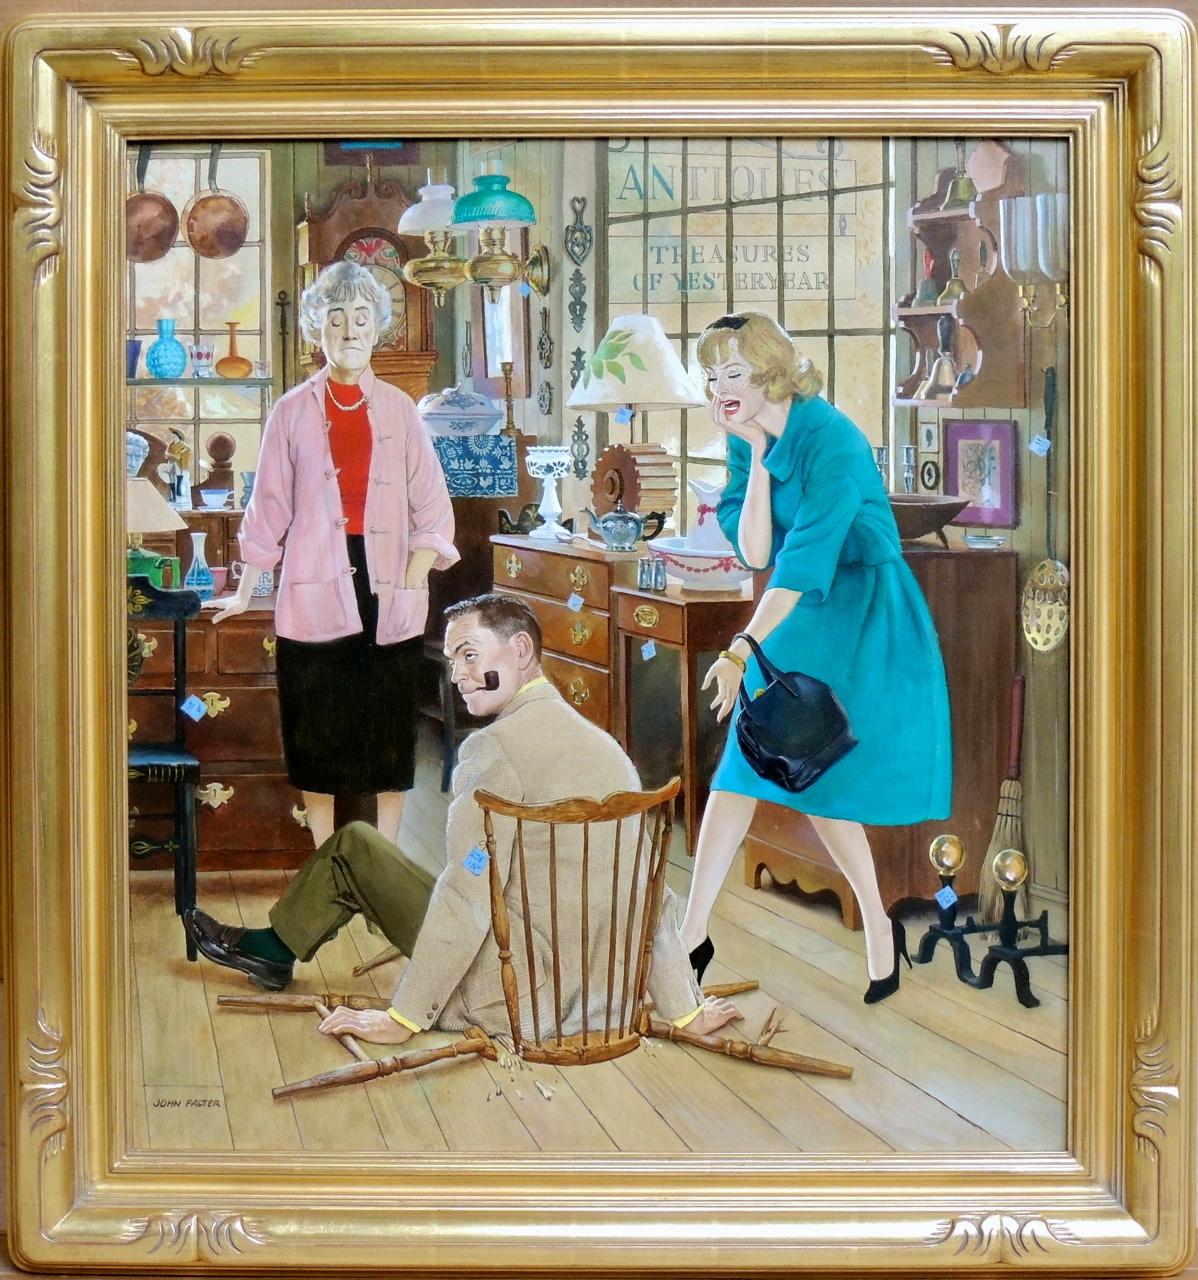 Antique Store Accident, Saturday Evening Post Cover - Painting by John Philip Falter